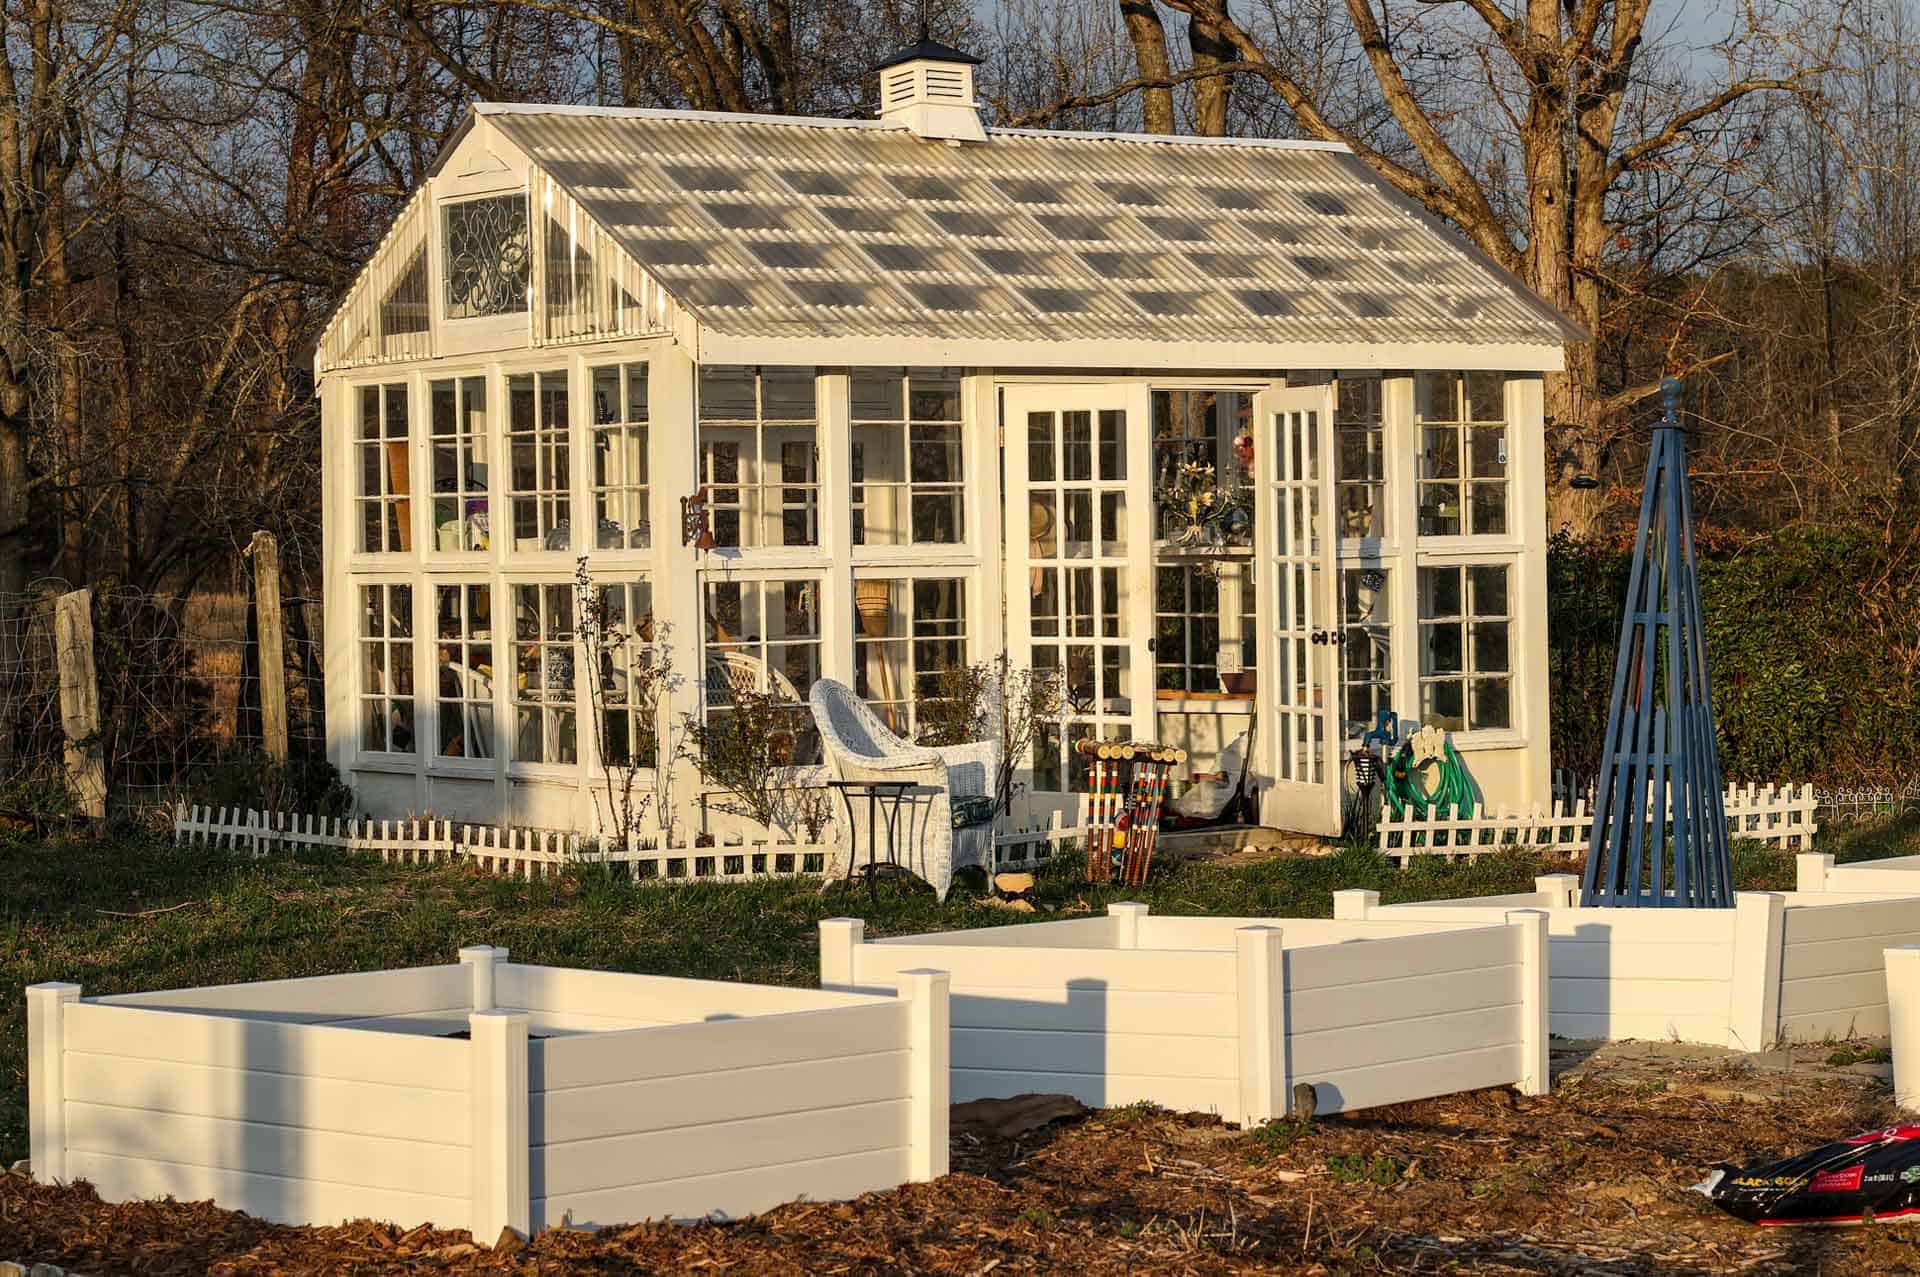 A freestanding greenhouse of individual panes of glass